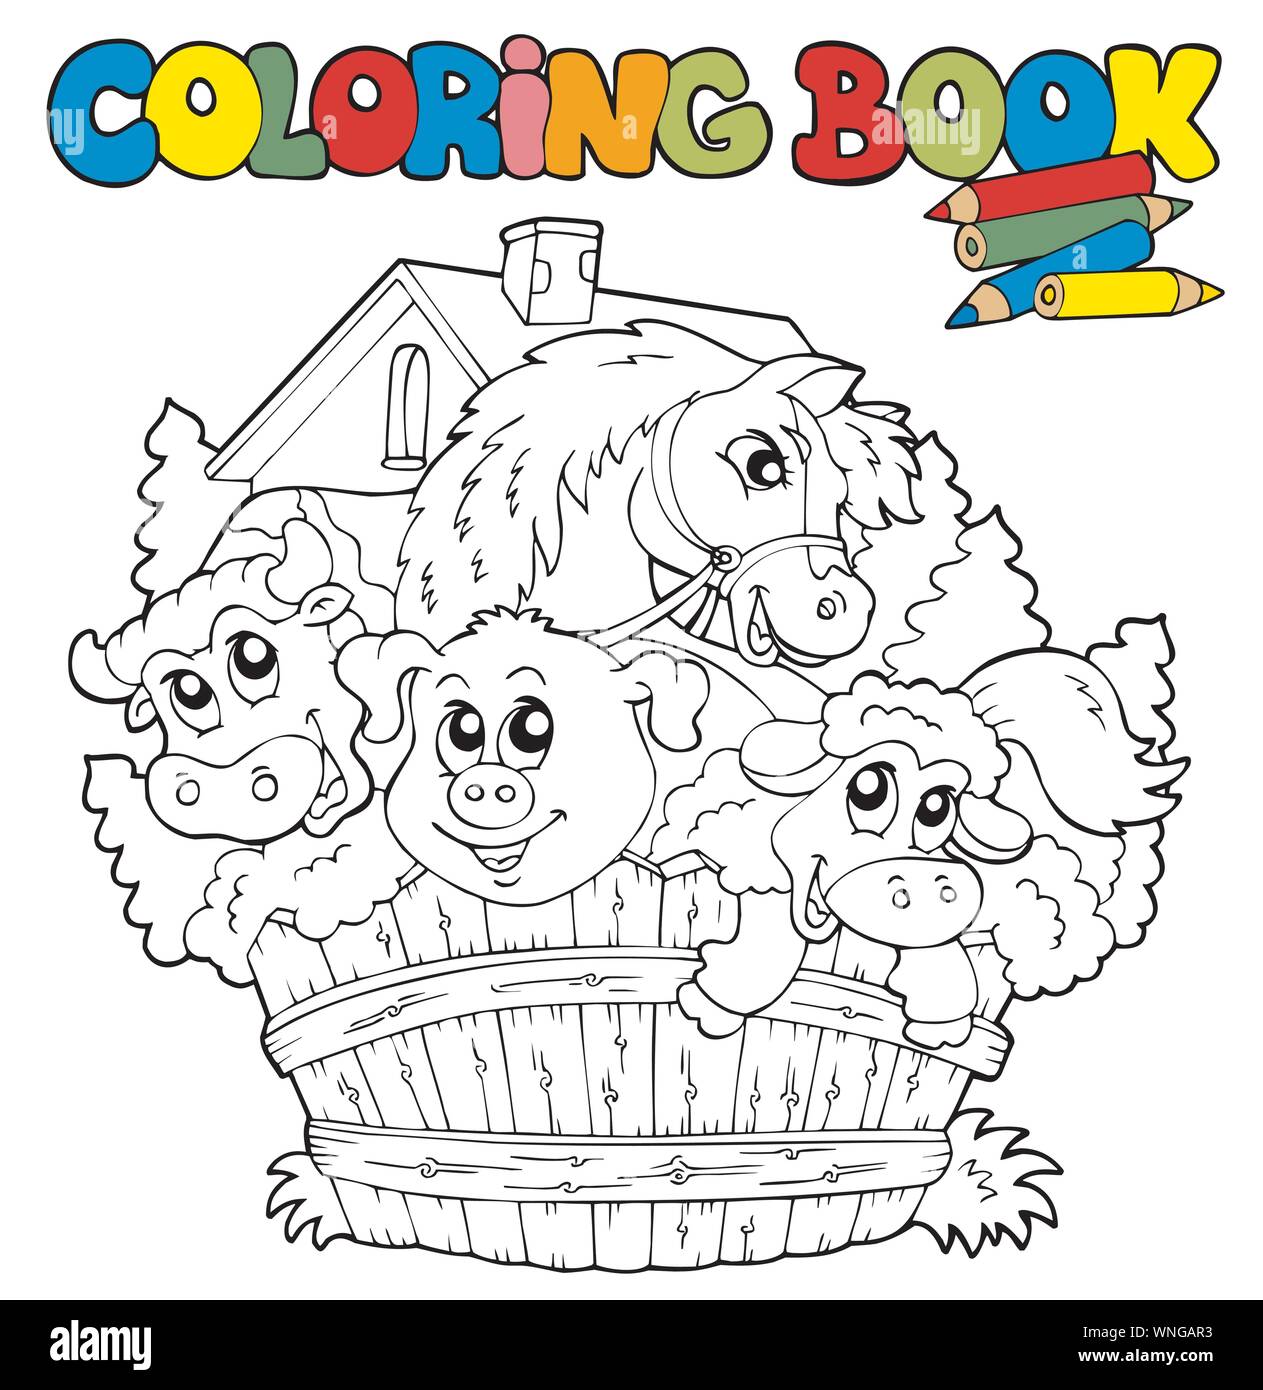 Download Coloring Book With Cute Animals 2 Stock Vector Image Art Alamy